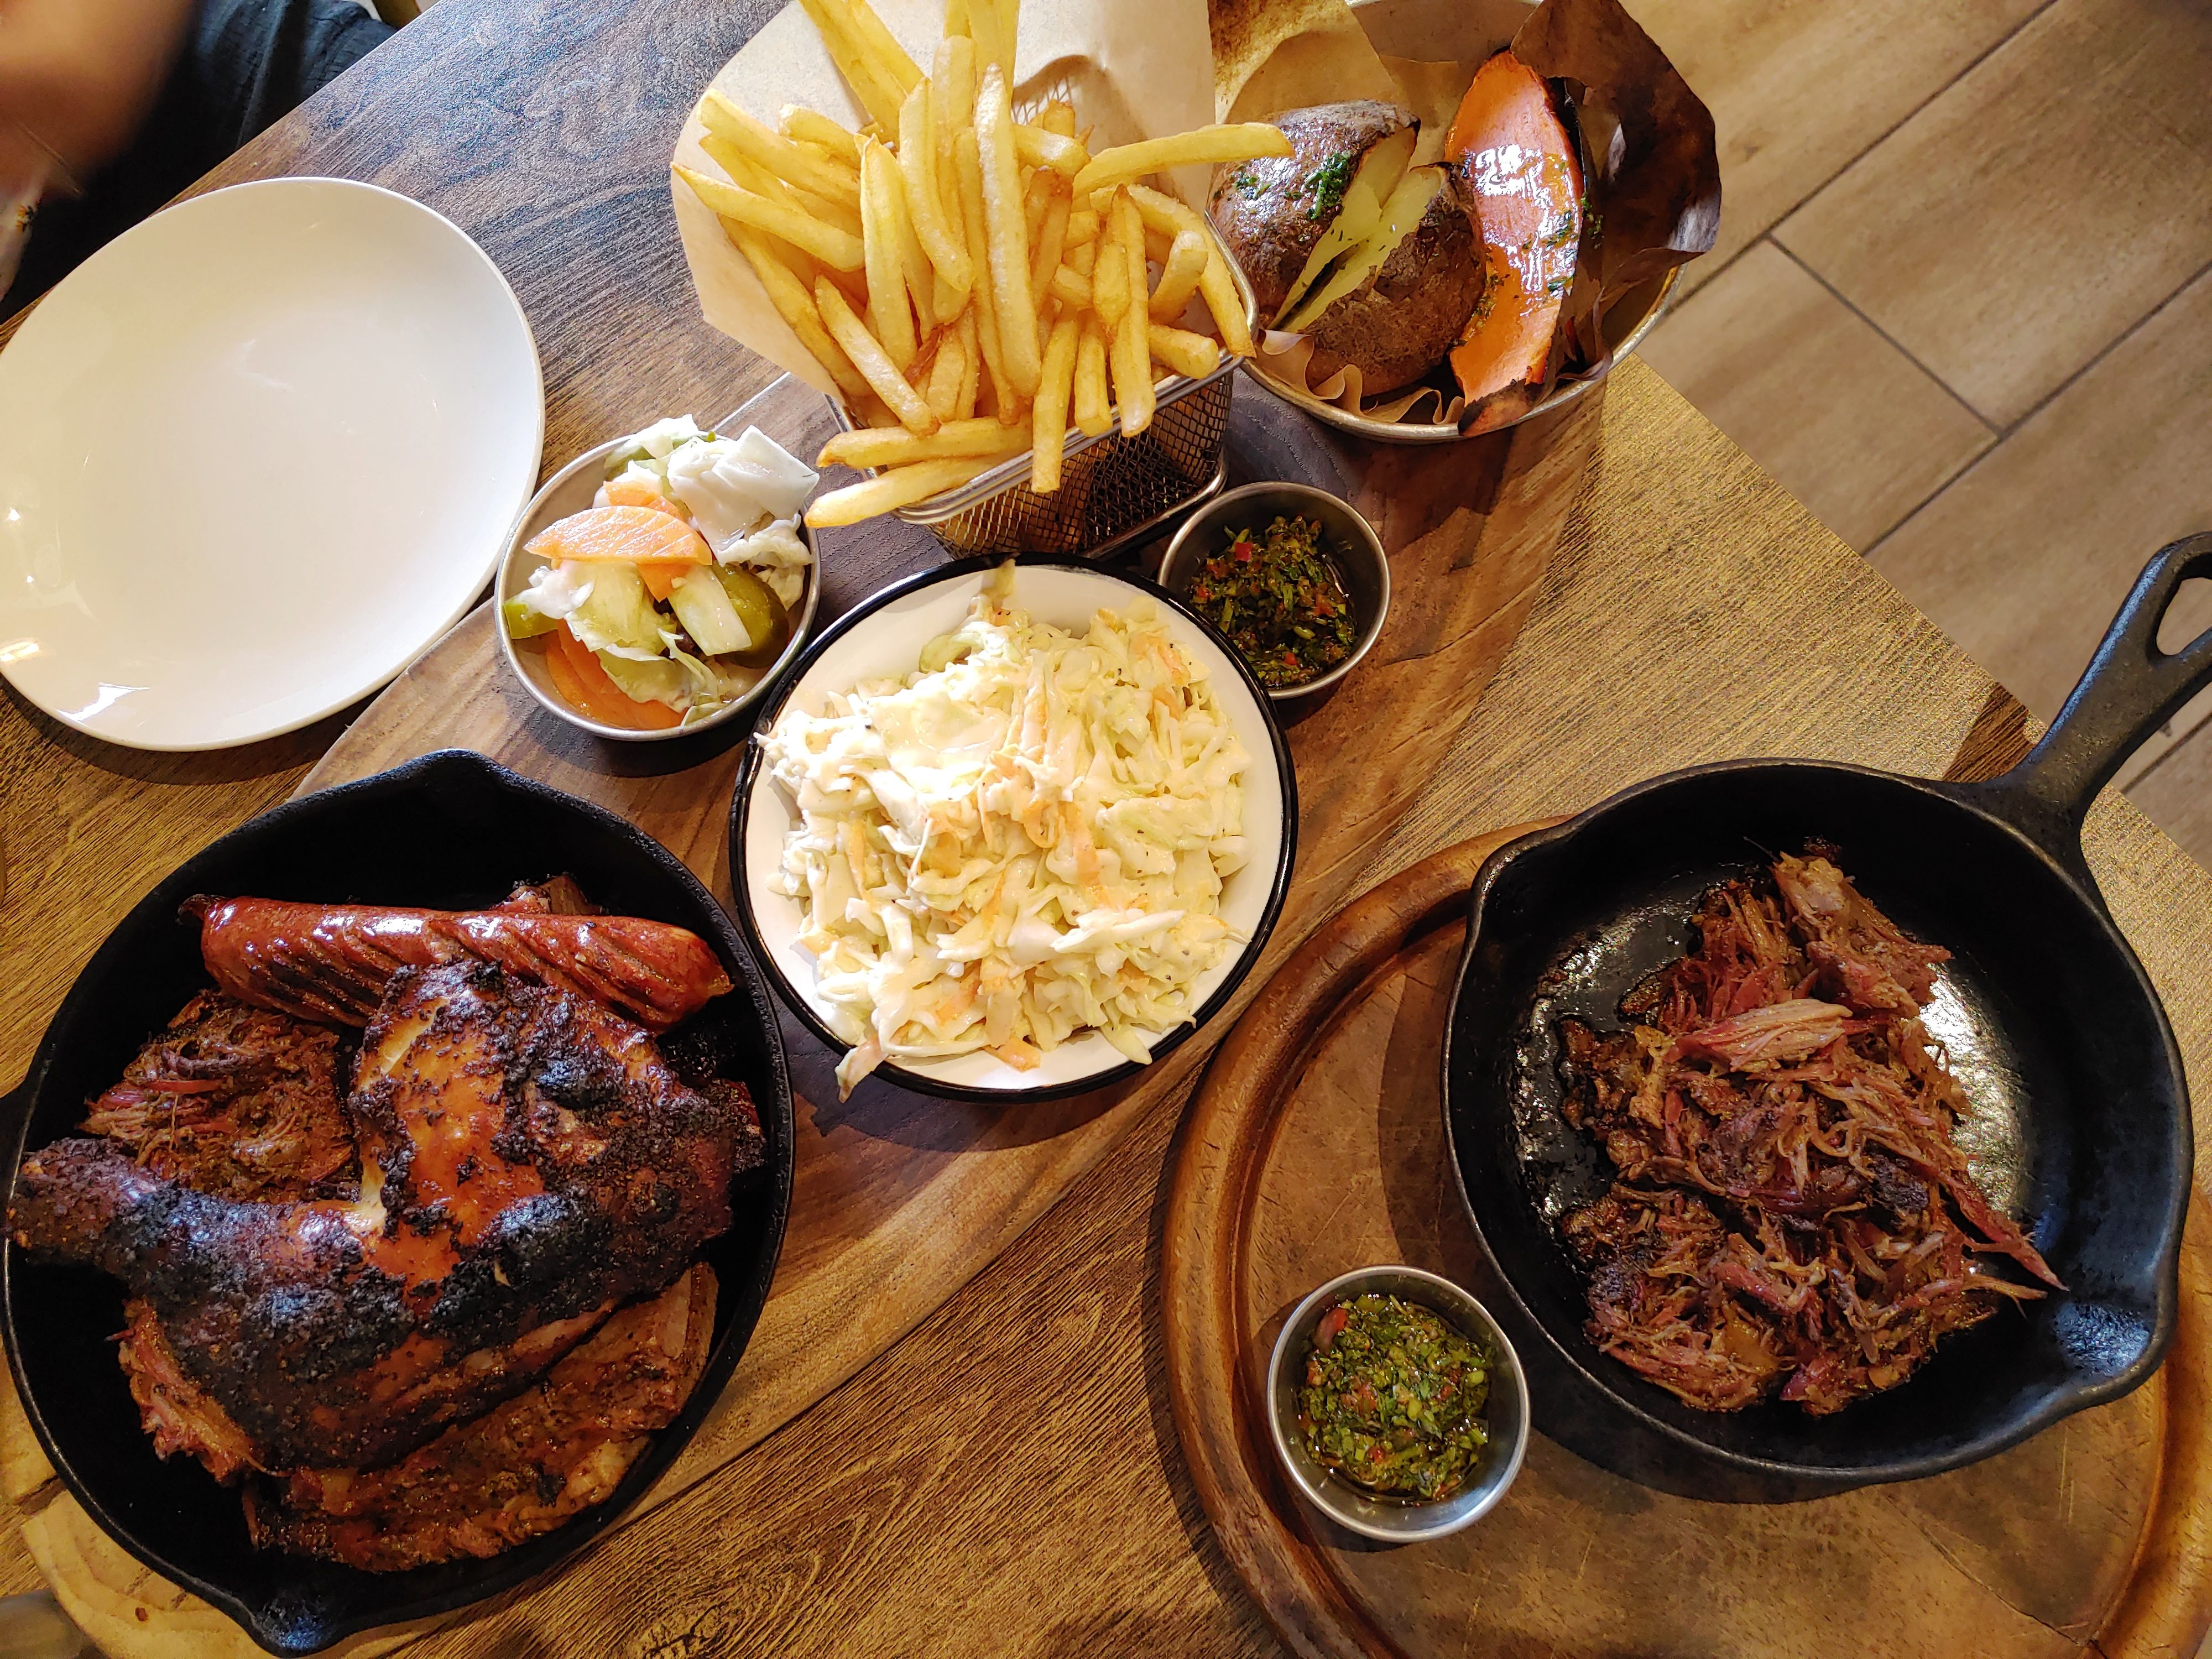 Slow-cooked meats and sides at Brisket Bar